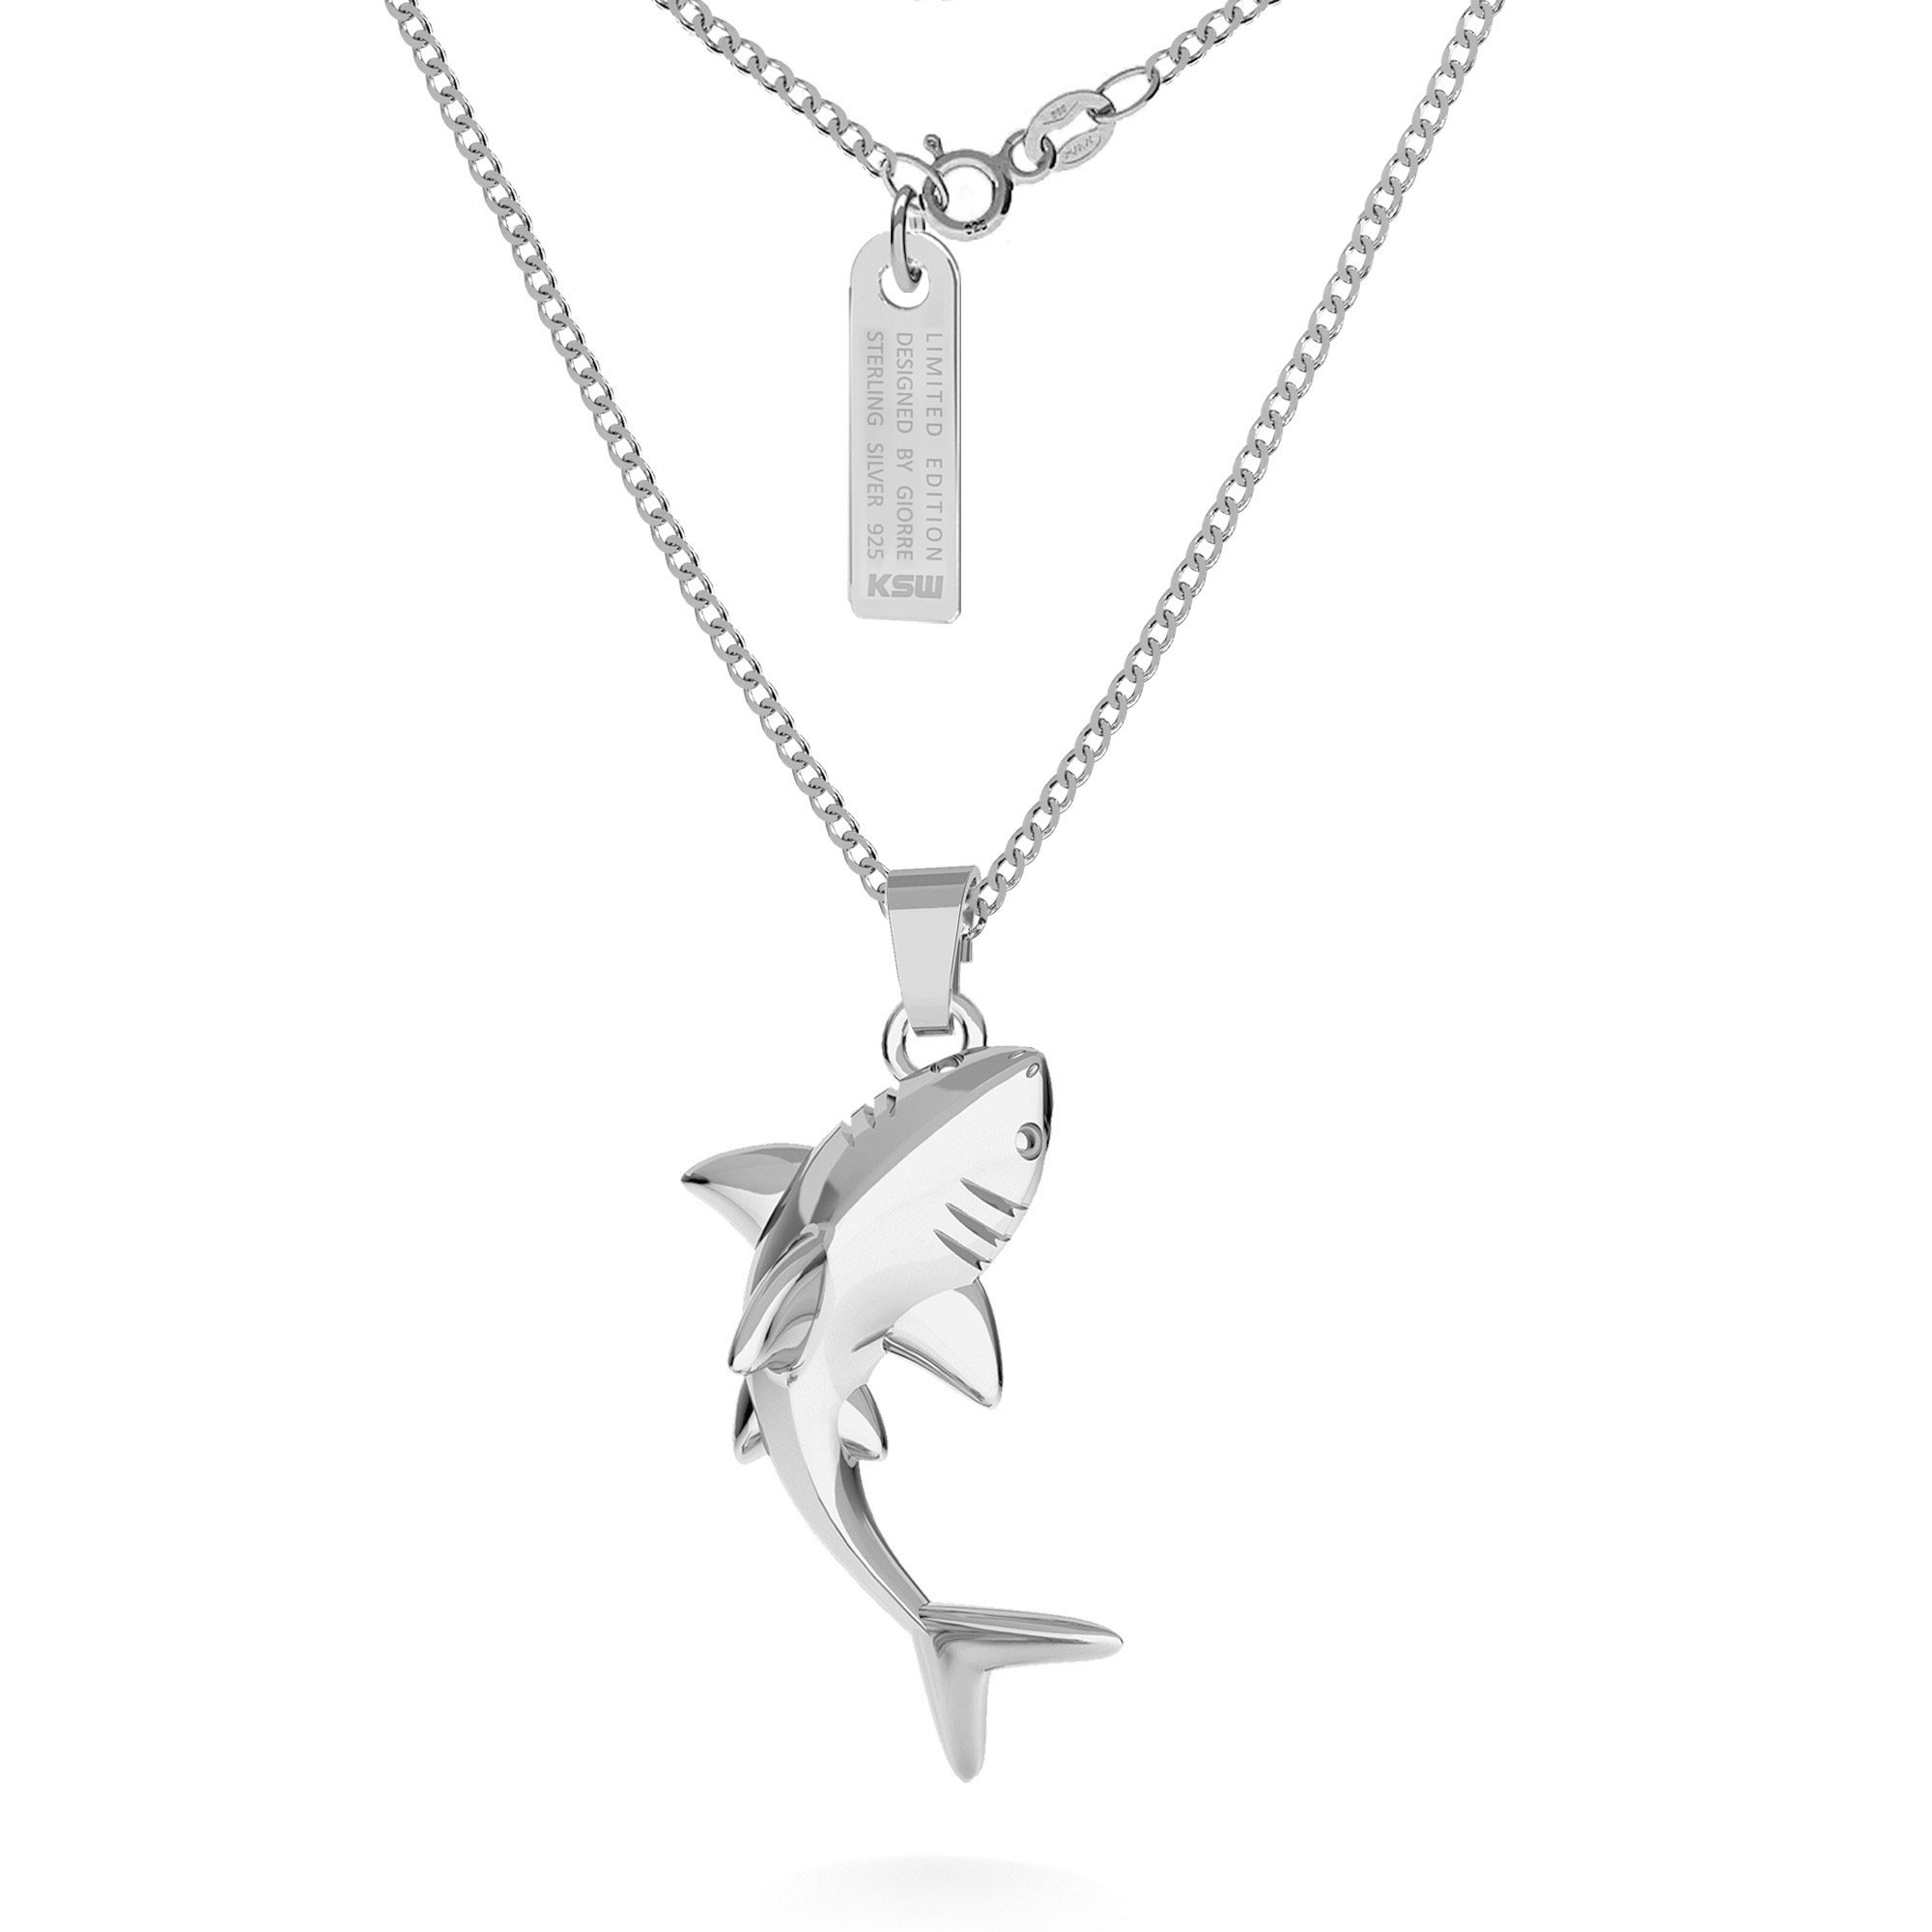 Shark necklace, curb chain, silver 925